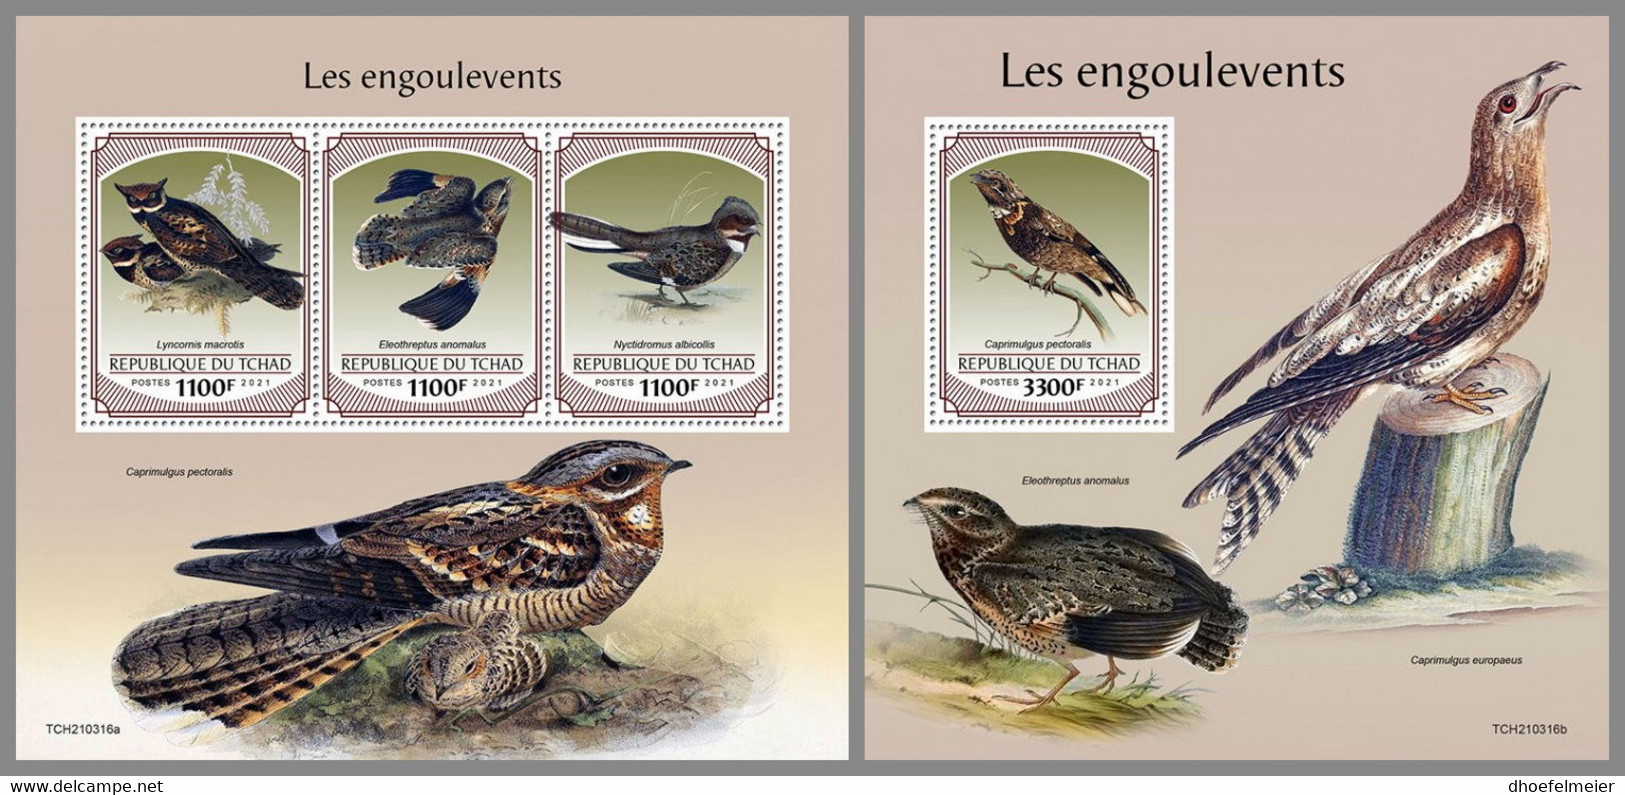 CHAD 2021 MNH Nightjars Nachtschwalben Engoulevents M/S+S/S - OFFICIAL ISSUE - DHQ2144 - Golondrinas